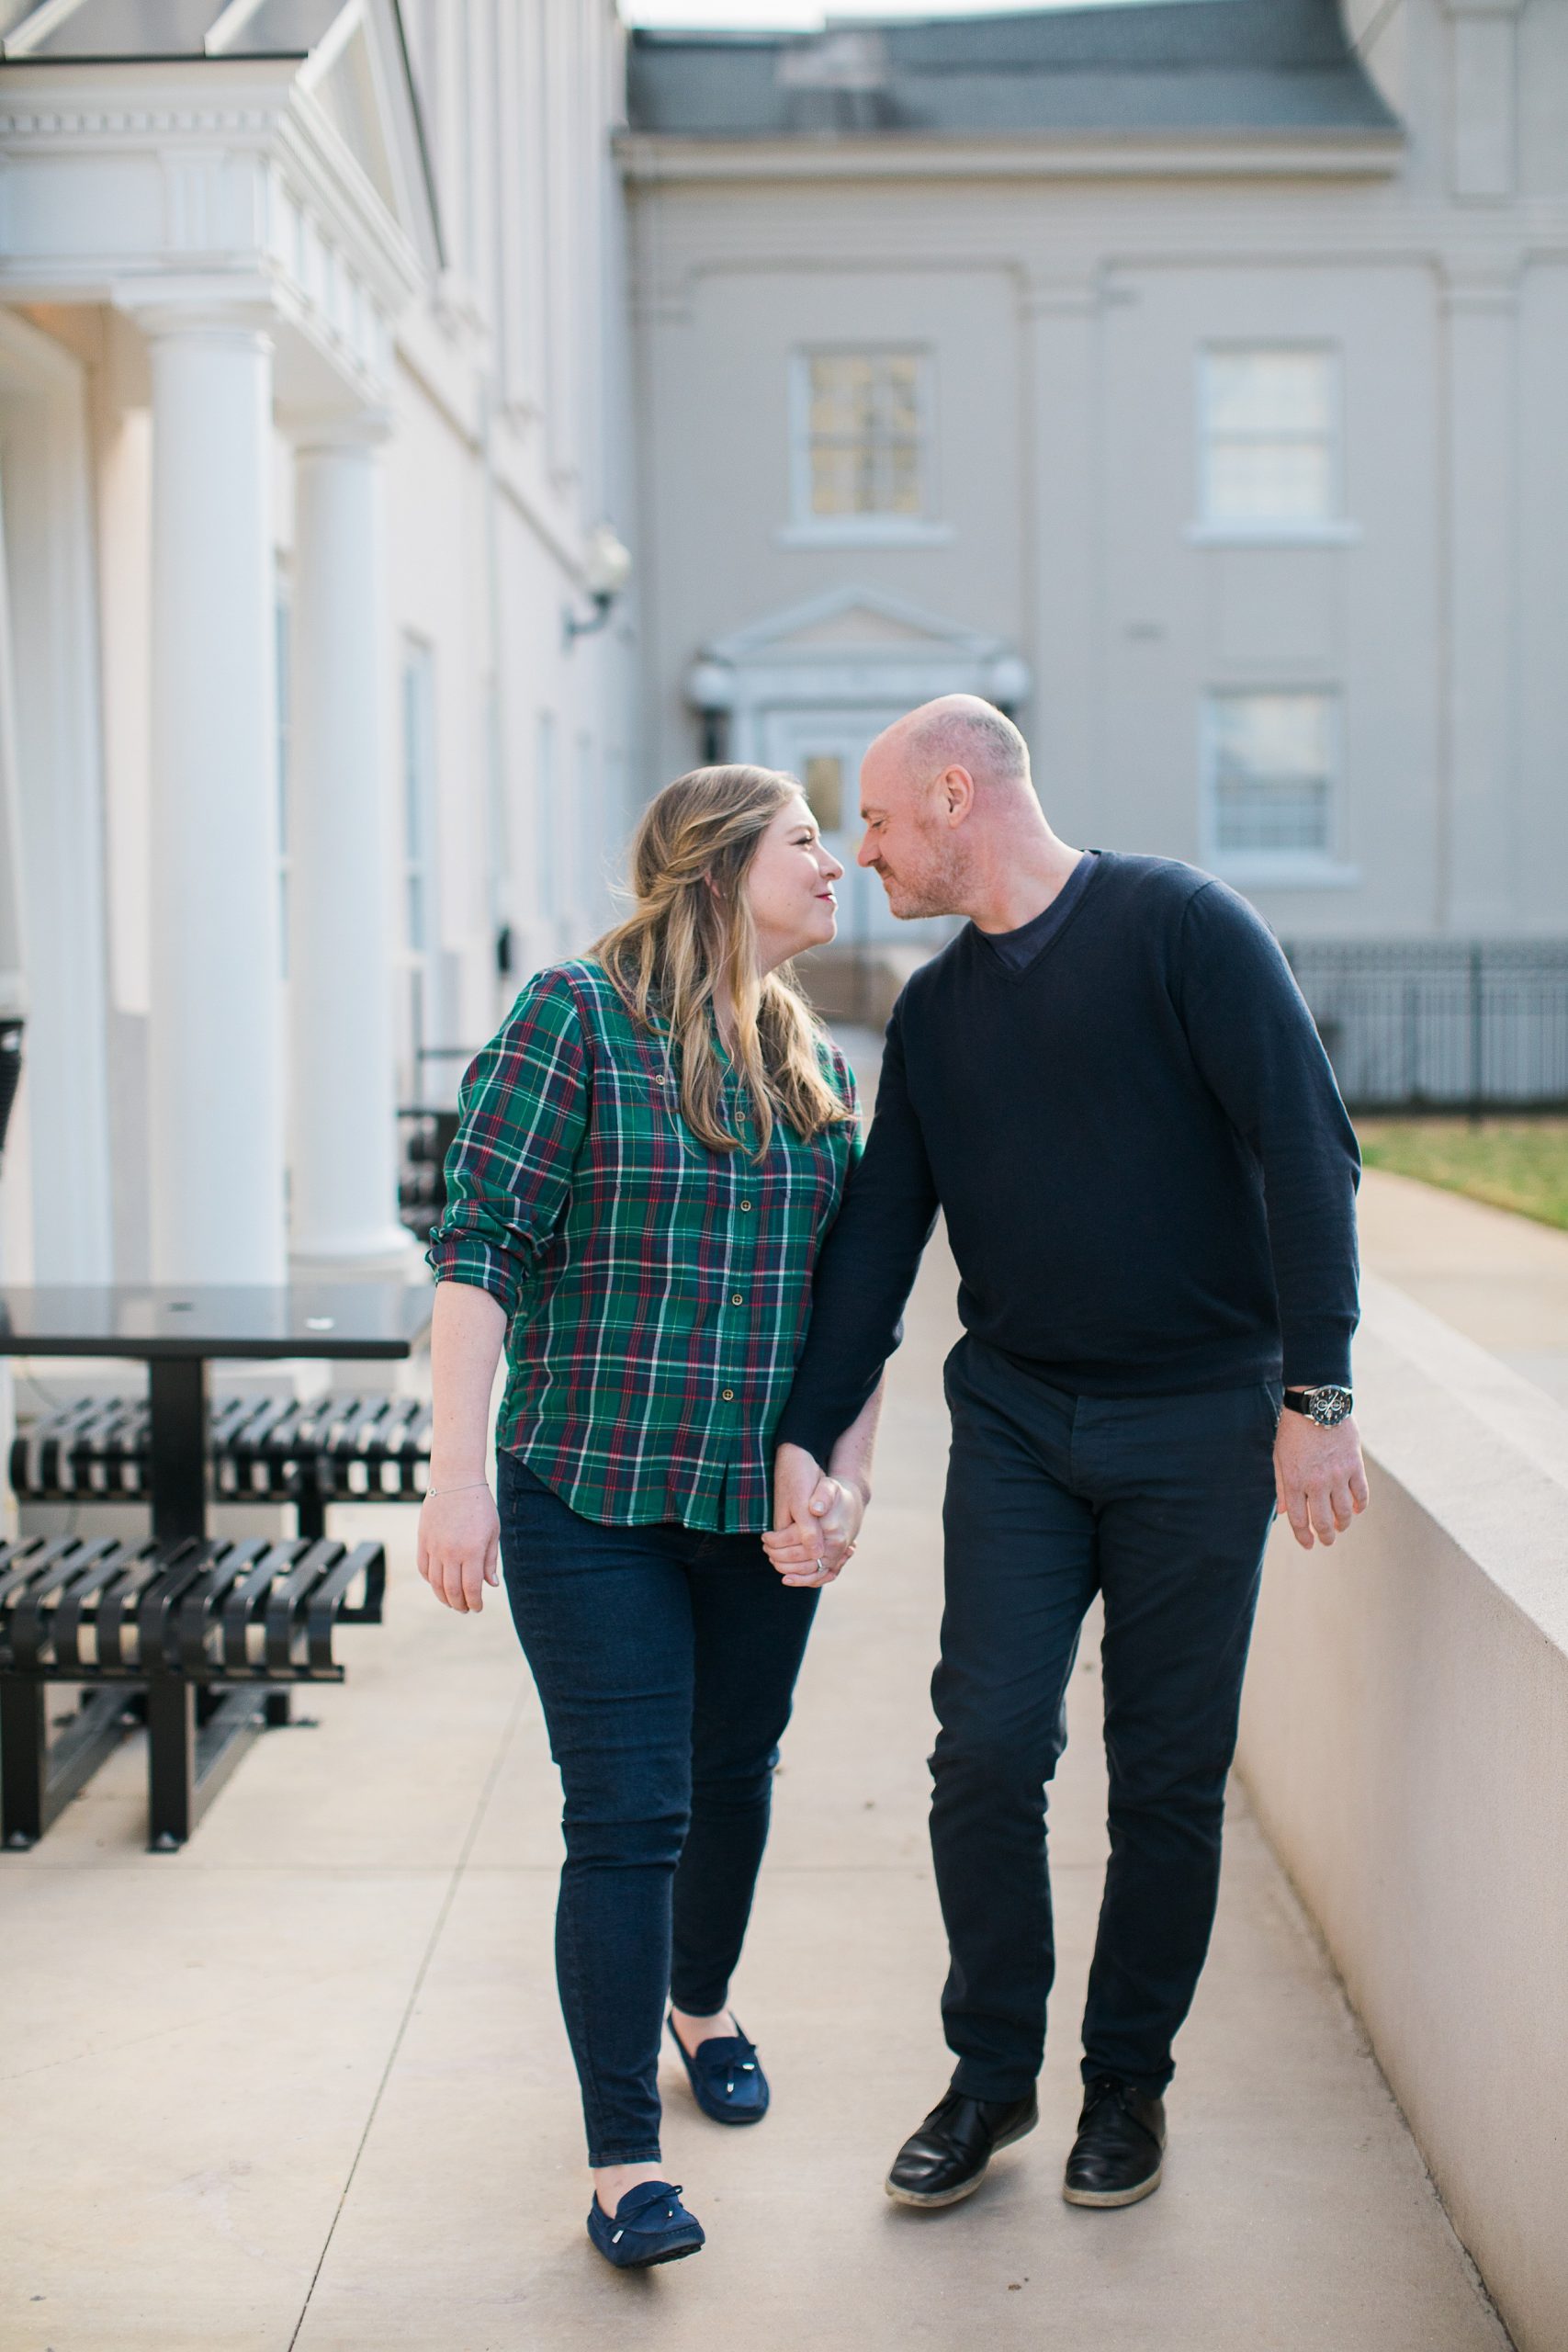 Greenville Engagement Photo Shoot by SARA TOUCHET Photography